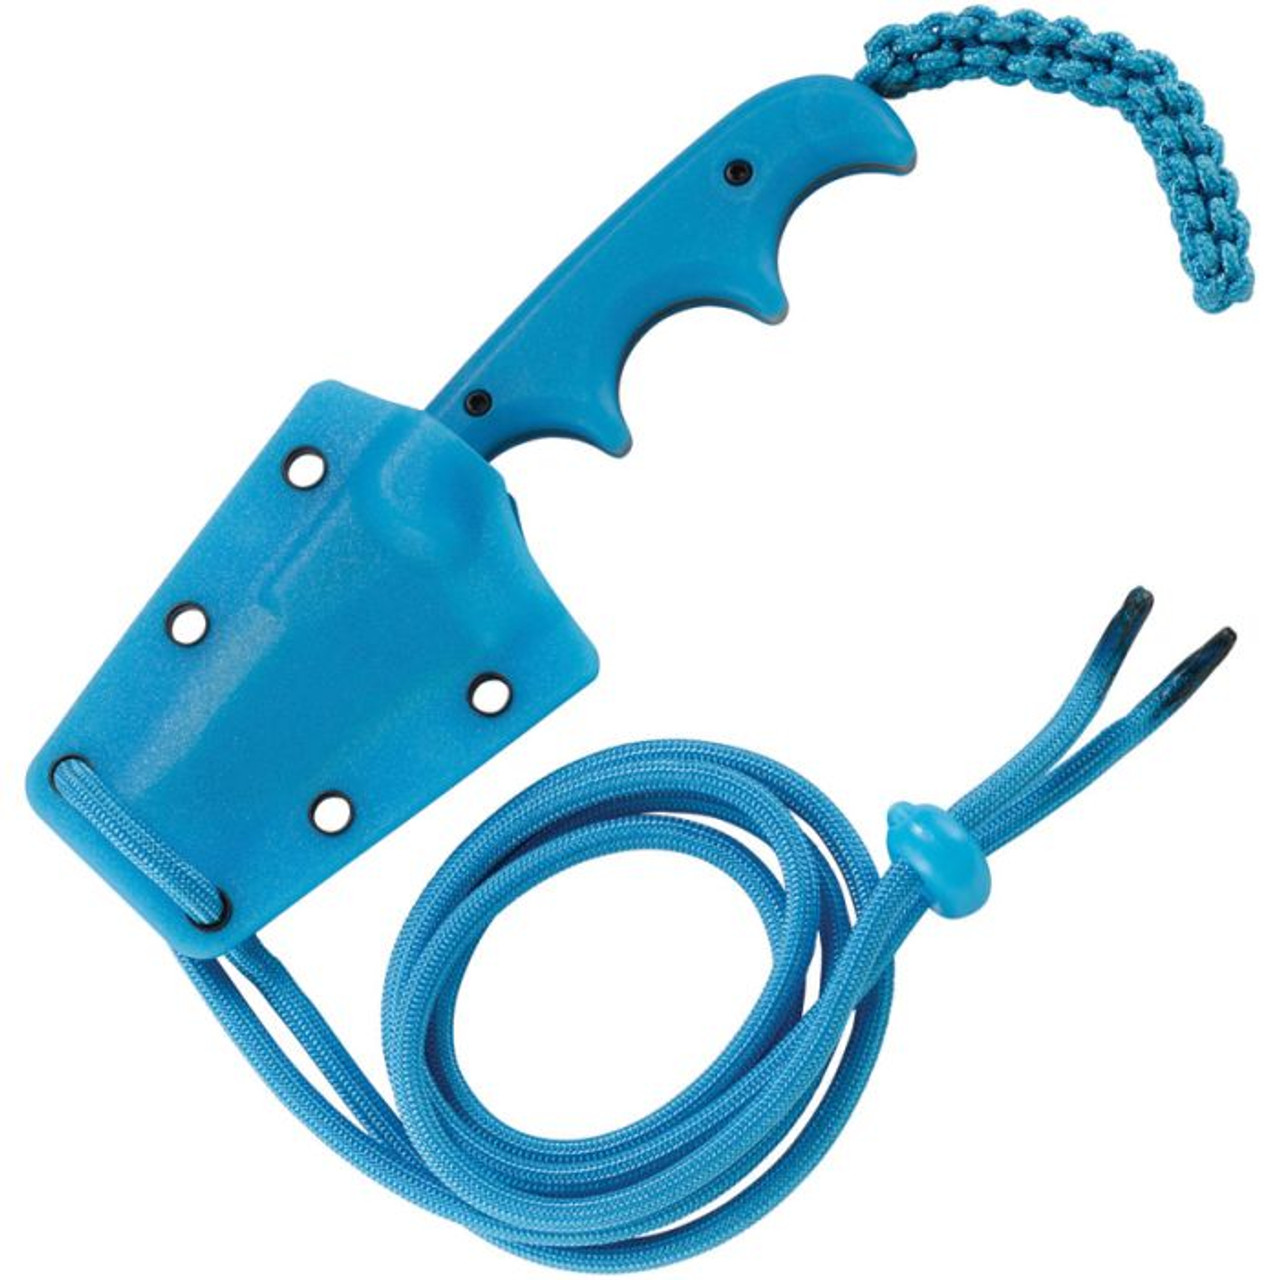 CRKT Minimalist Bowie Cthulhu (CR2387O) 2.13" 8Cr13MoV Satin Clip Point Plain Blade, Blue Finger Grooved Thermoplastic Handle with Blue Paracord Lanyard, Blue Thermoplastic Belt Sheath